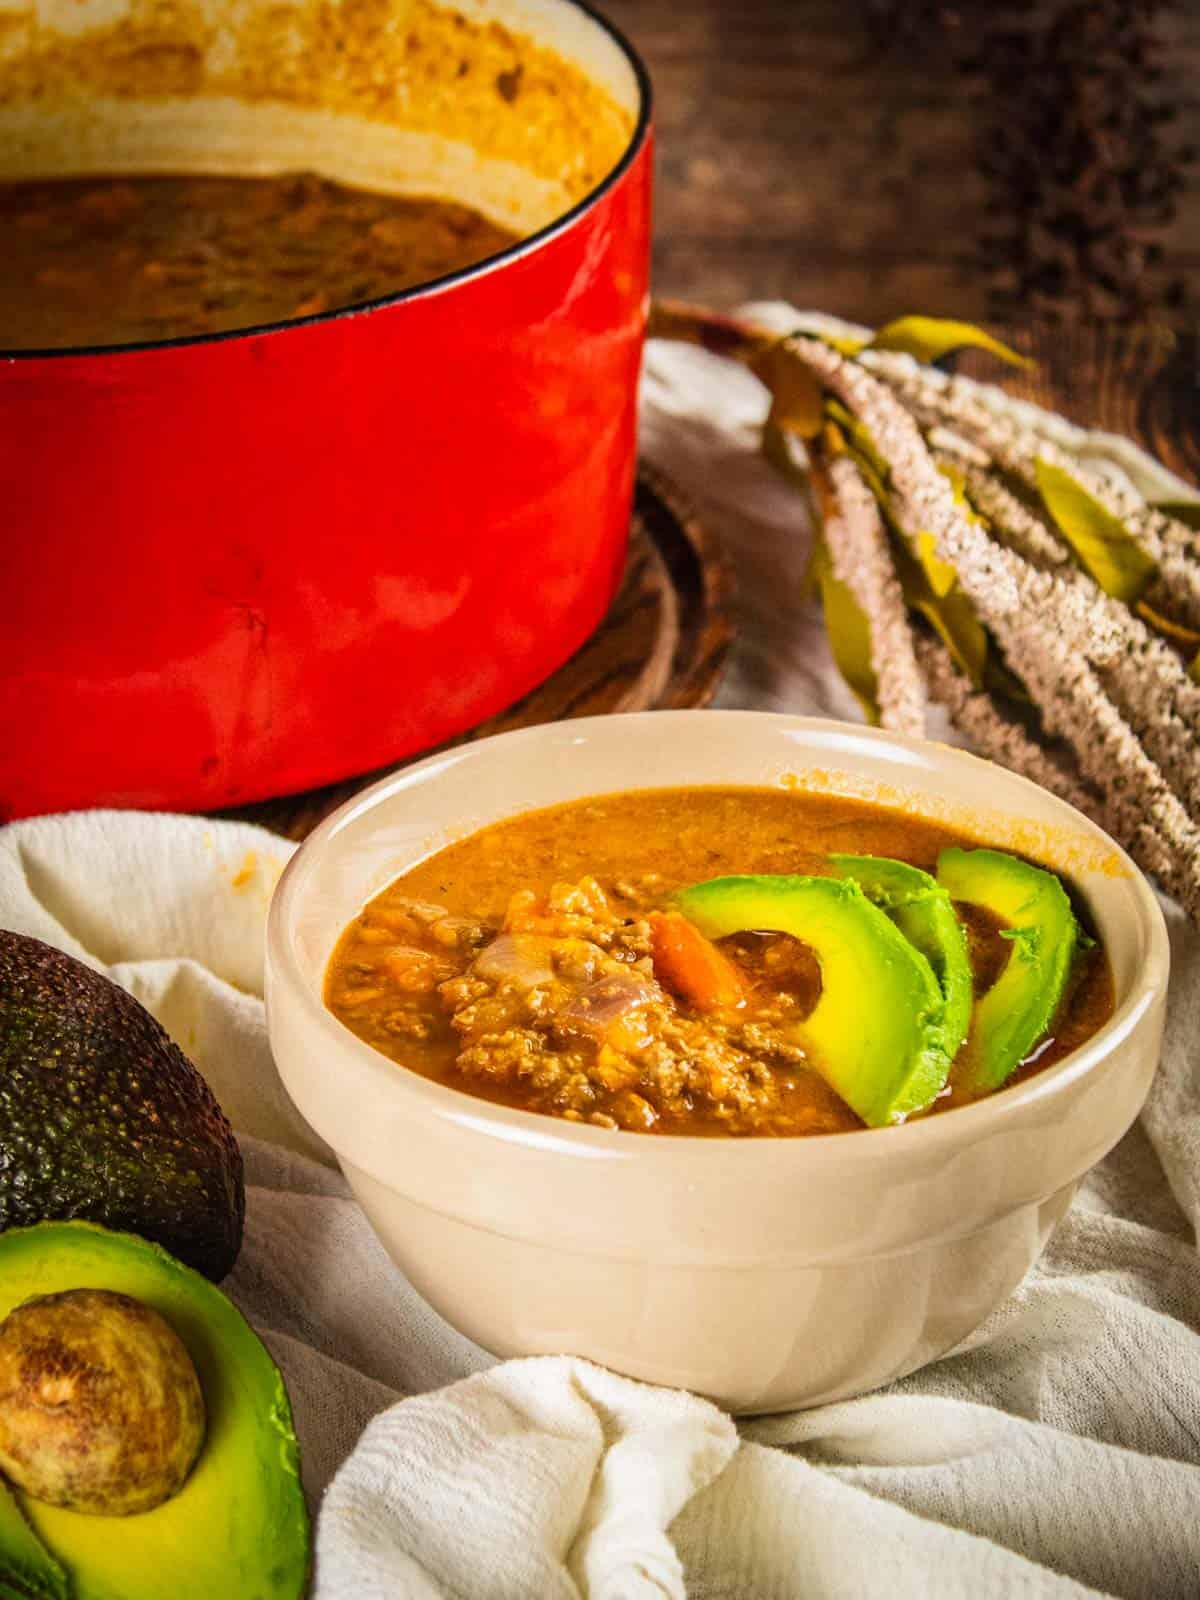 bowl of sweet potato turkey chili topped with sliced avocado with avocados next to it and a red pot in the background